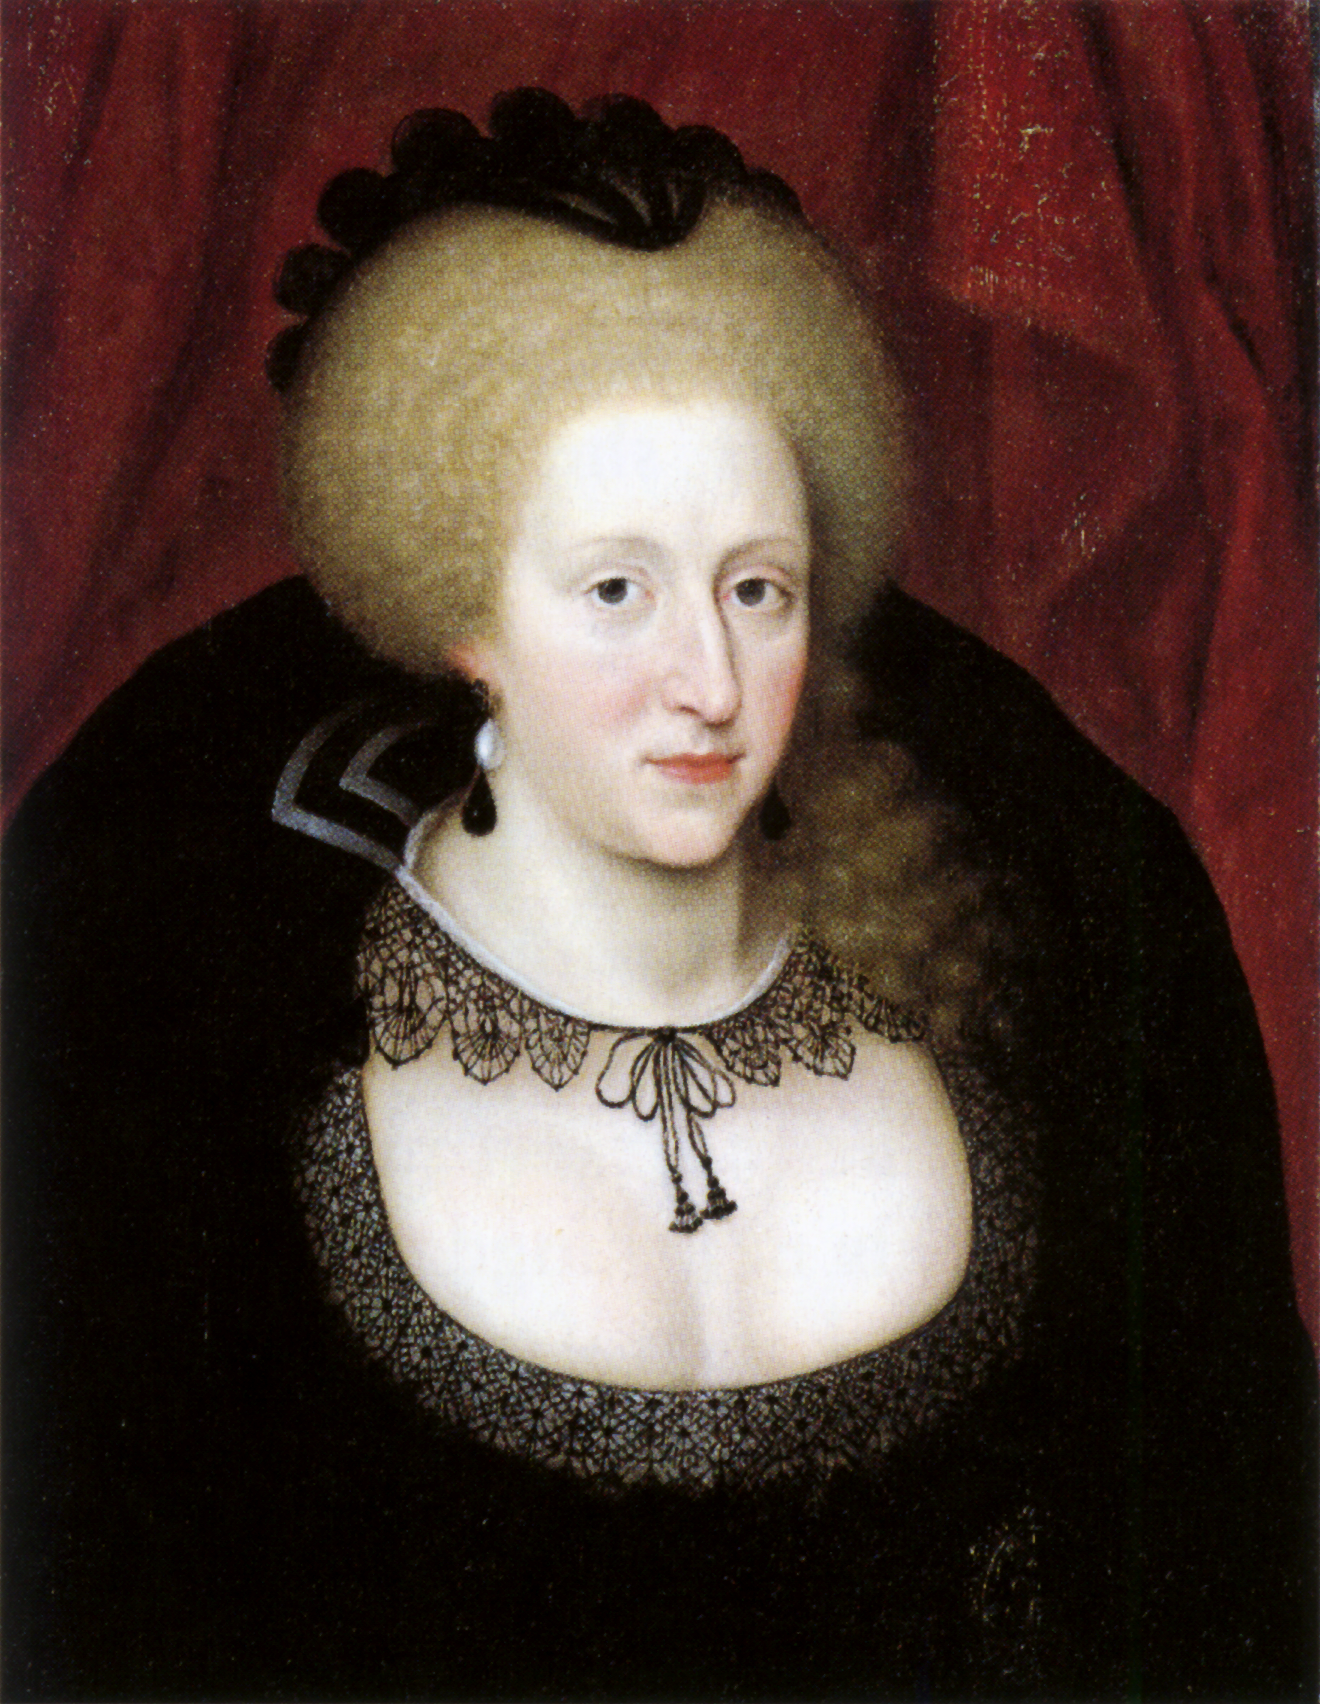 Portrait of Anne of Denmark in mourning attire by Marcus Gheeraerts the Younger. Image courtesy of the National Portrait Gallery (UK).